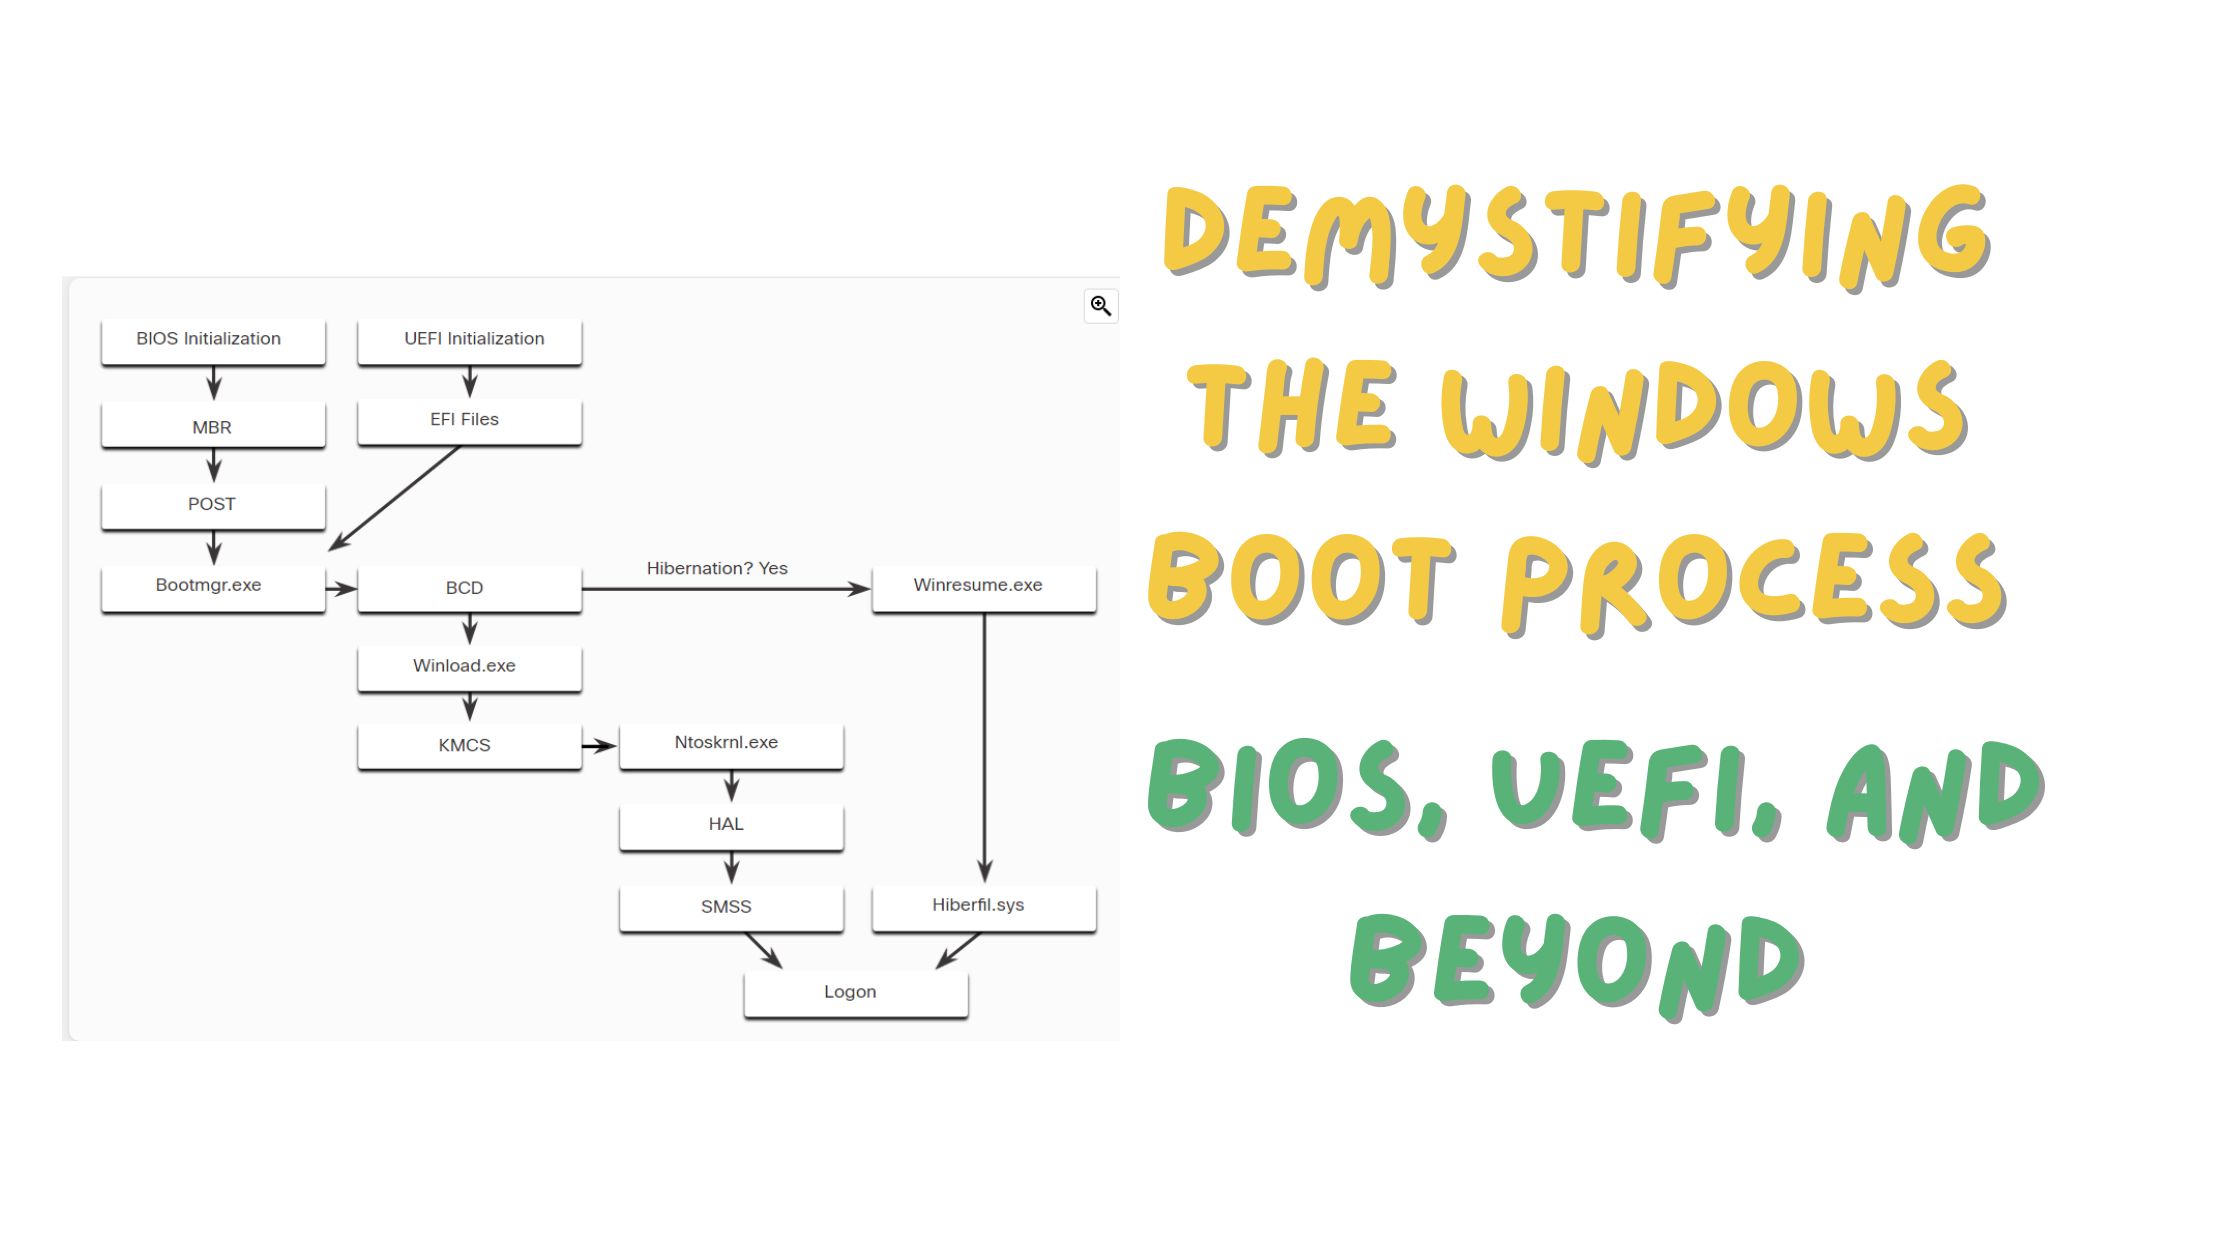 Demystifying the Windows Boot Process BIOS, UEFI, and Beyond (1)